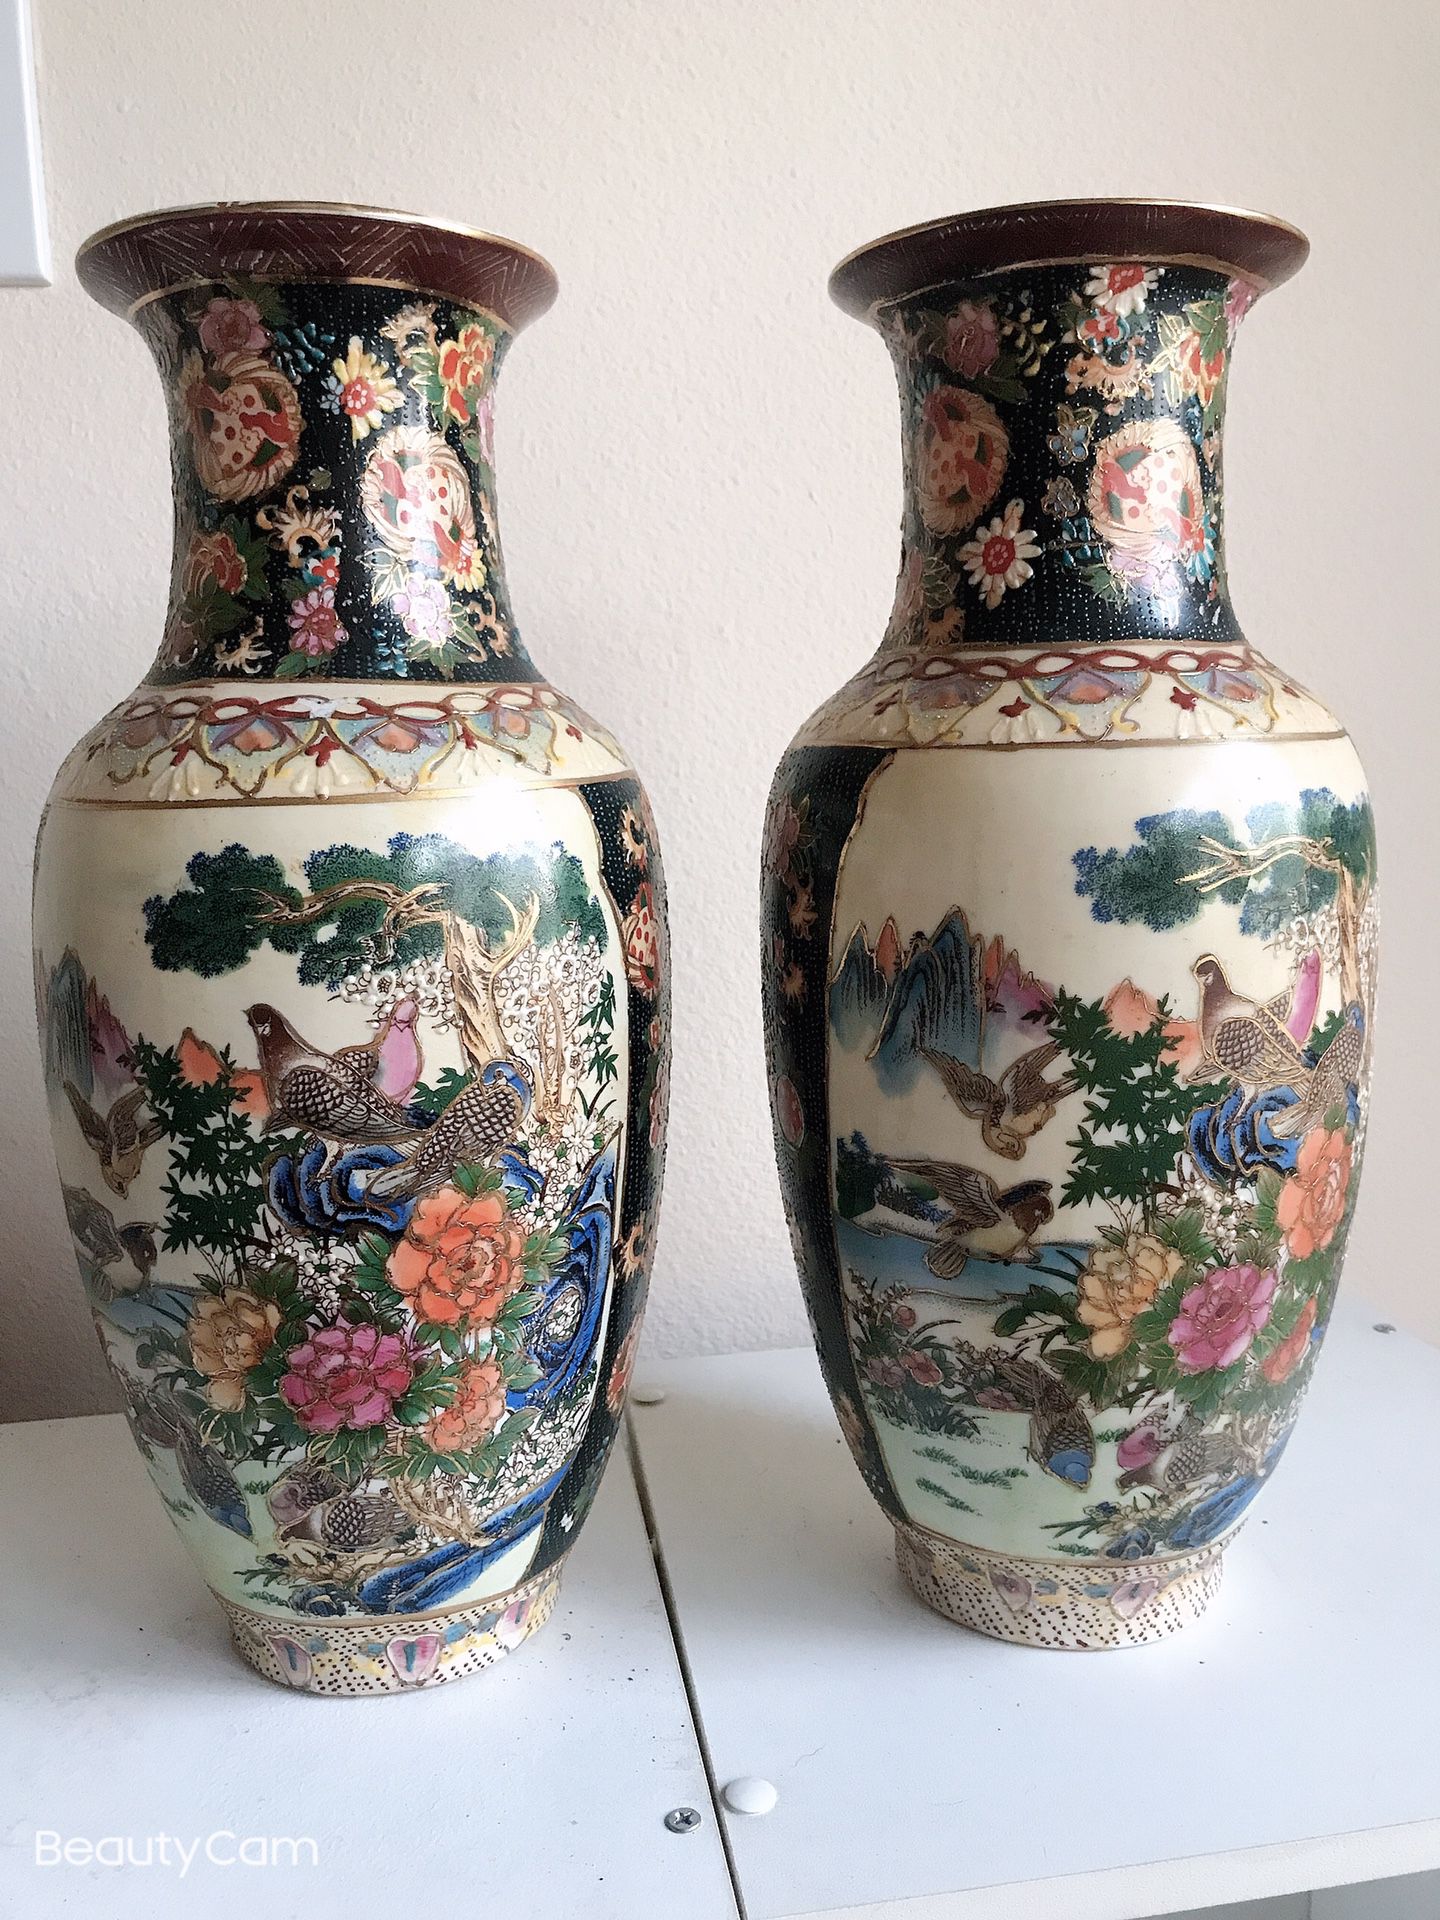 A set, two china vase antique big size 7 in x 15 in hacienda heights pick up